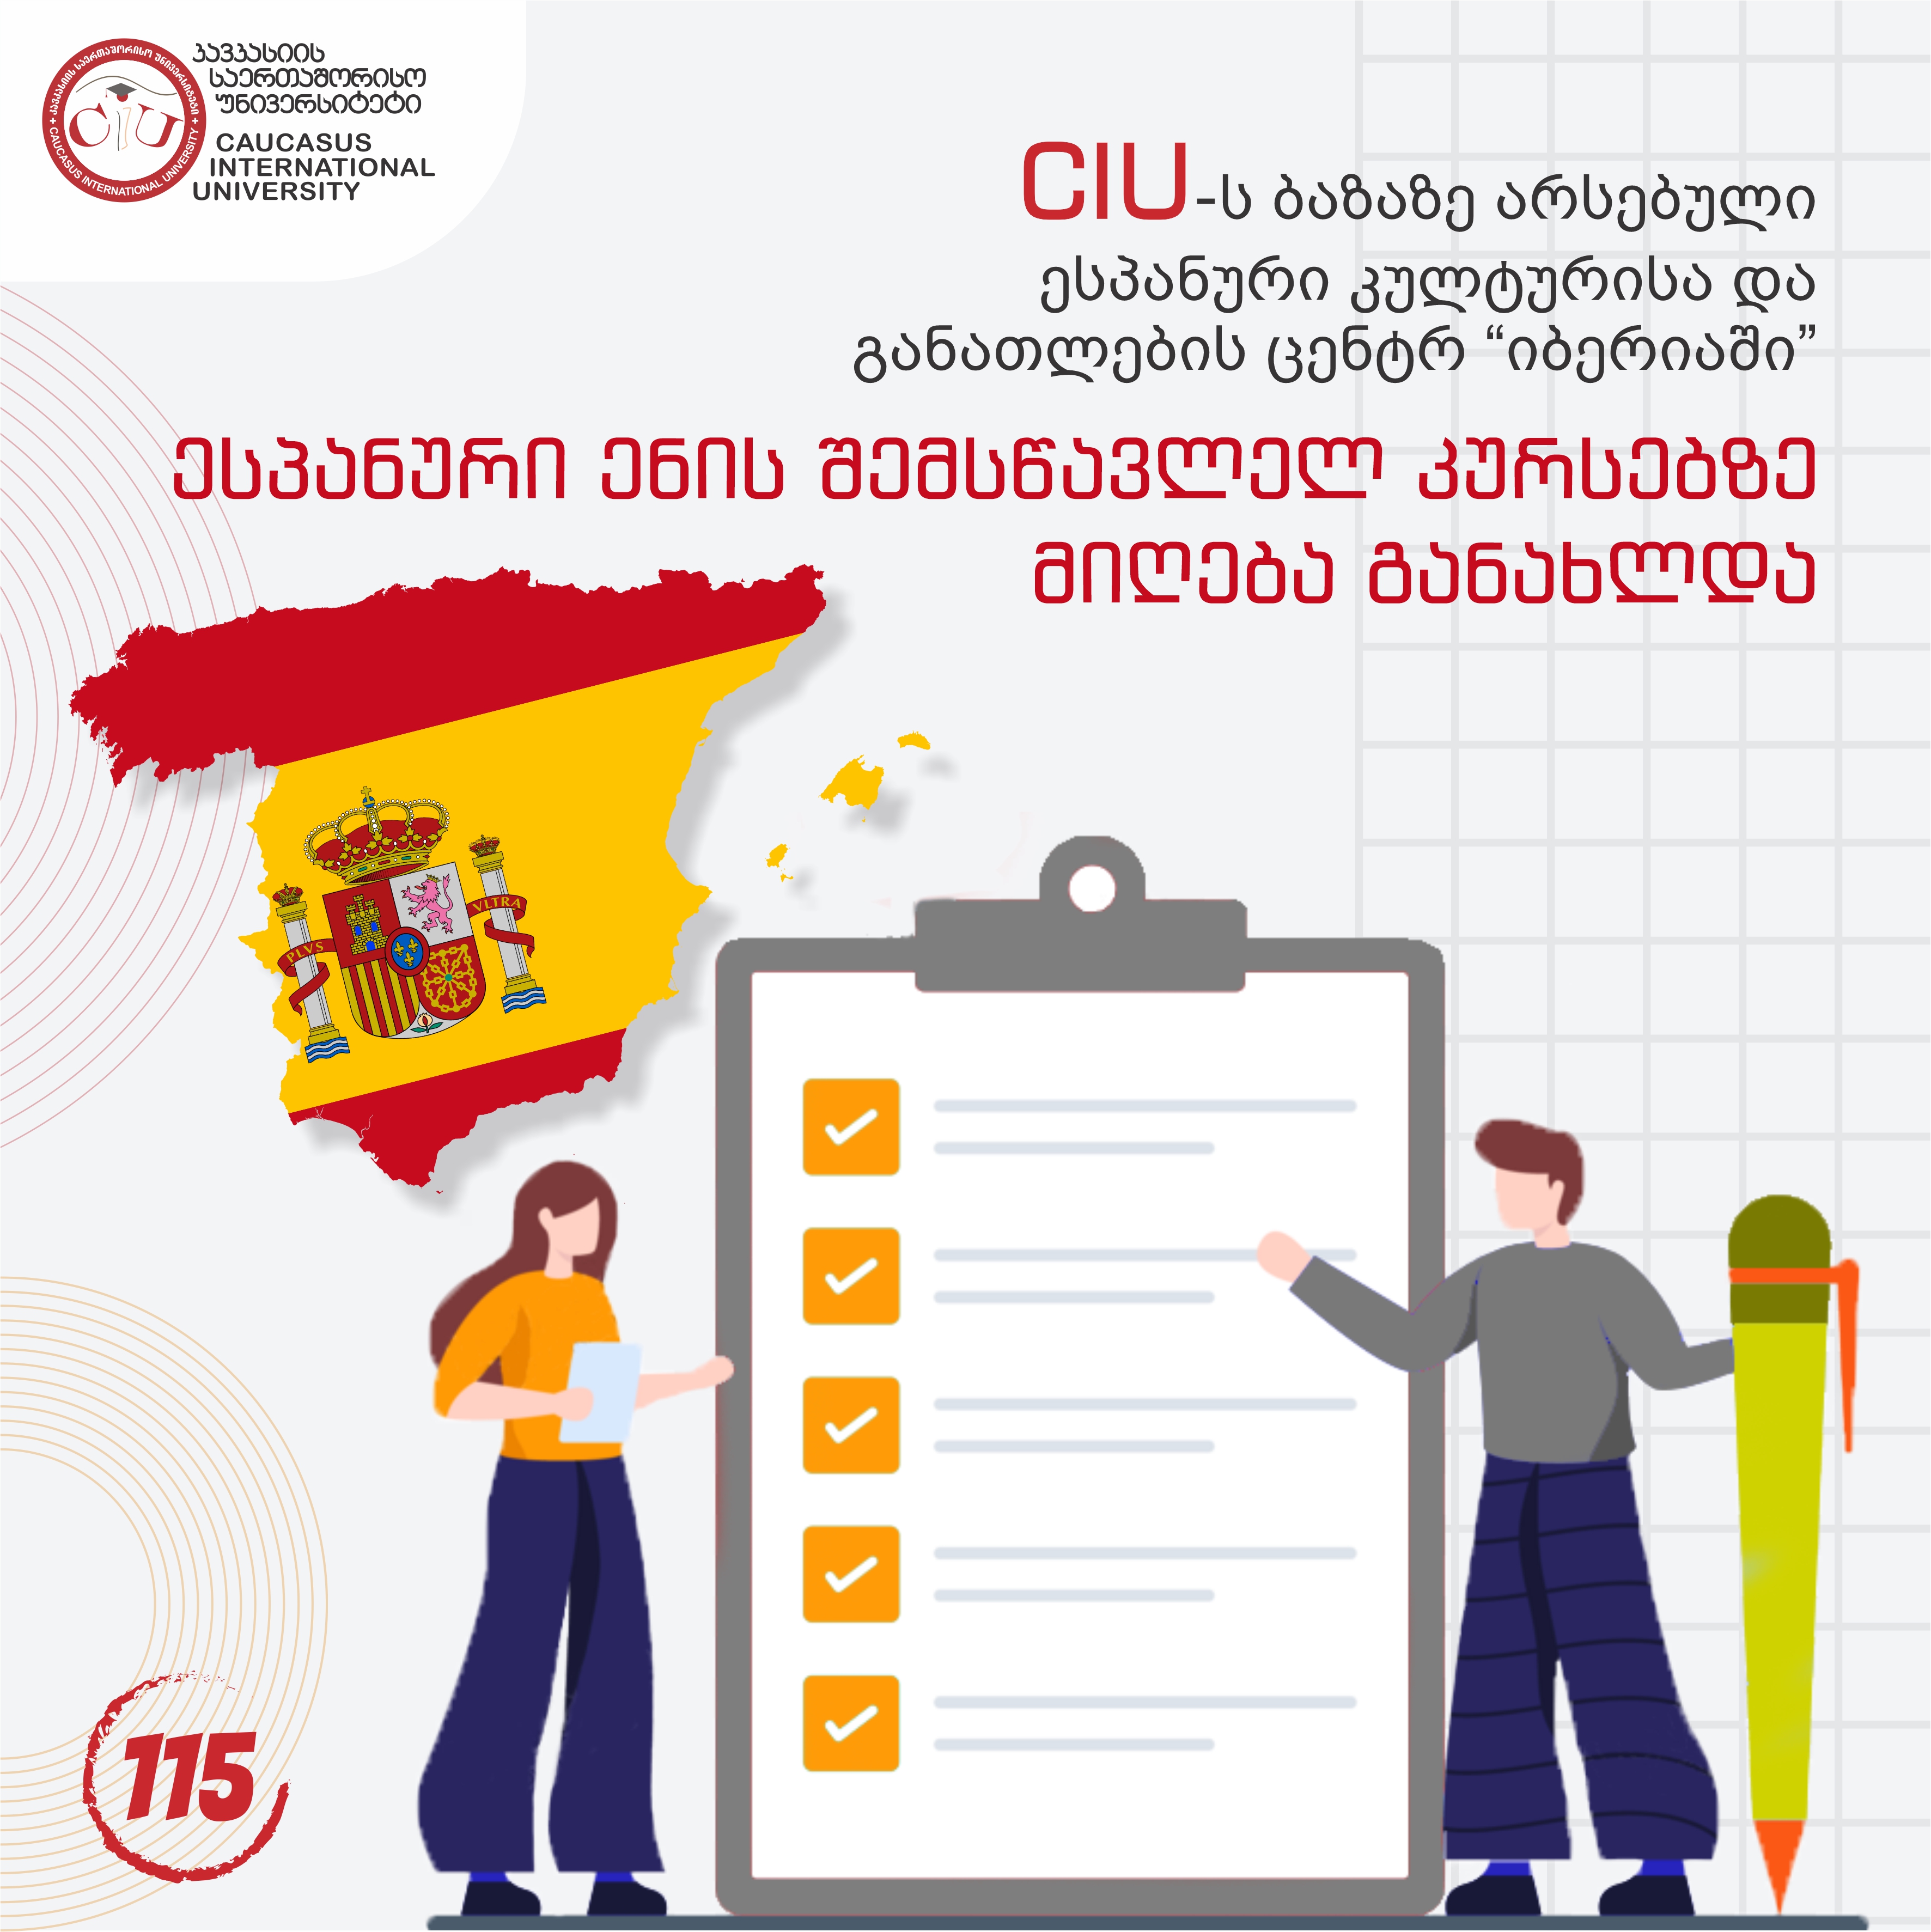  Admission to Spanish Language Courses at CIU Based Spanish Culture and Education Center “Iberia” Has Resumed